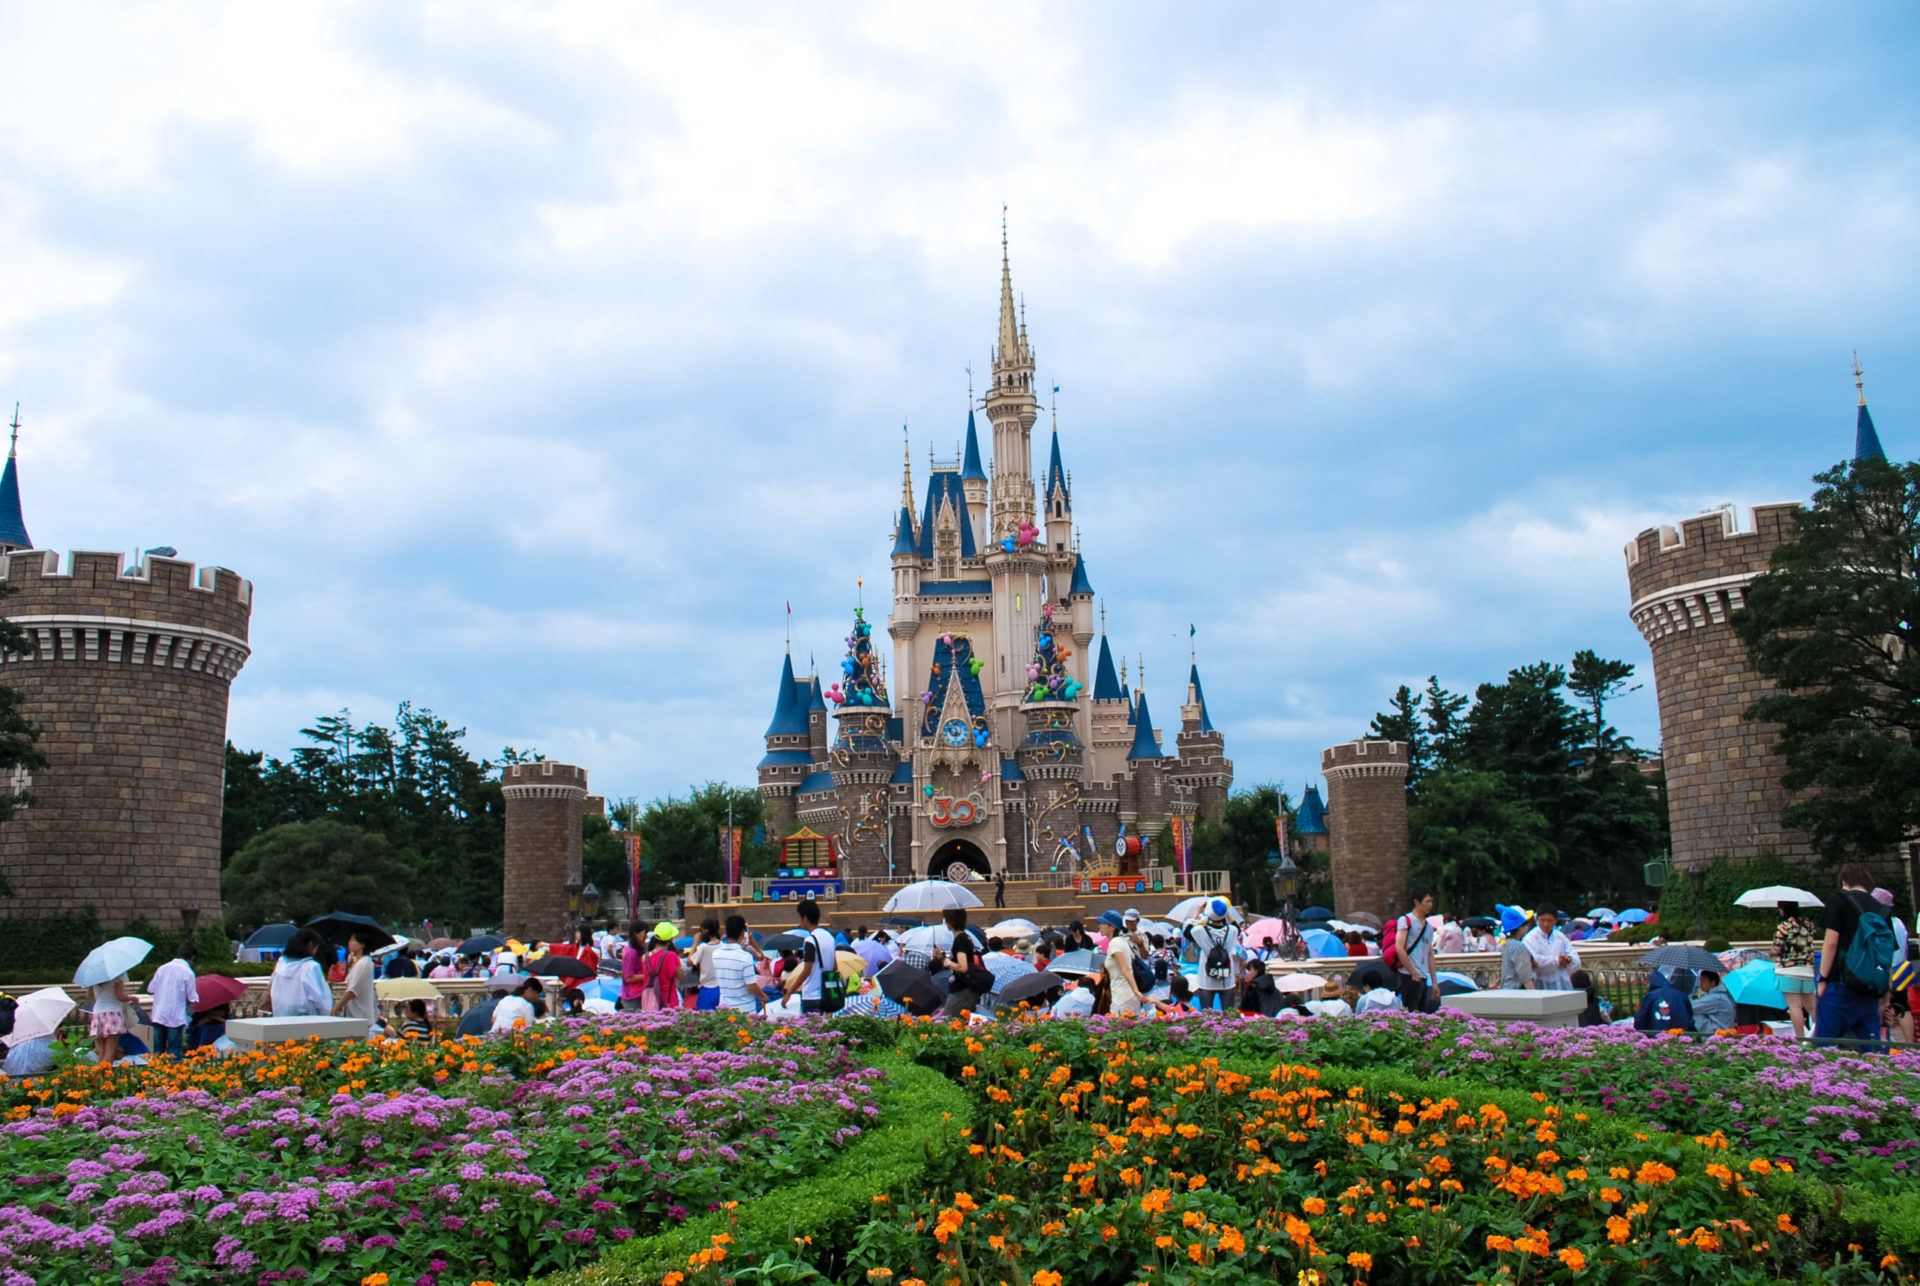 Tokyo Disneyland Resort Closure Extended Until MidMay Due to COVID19